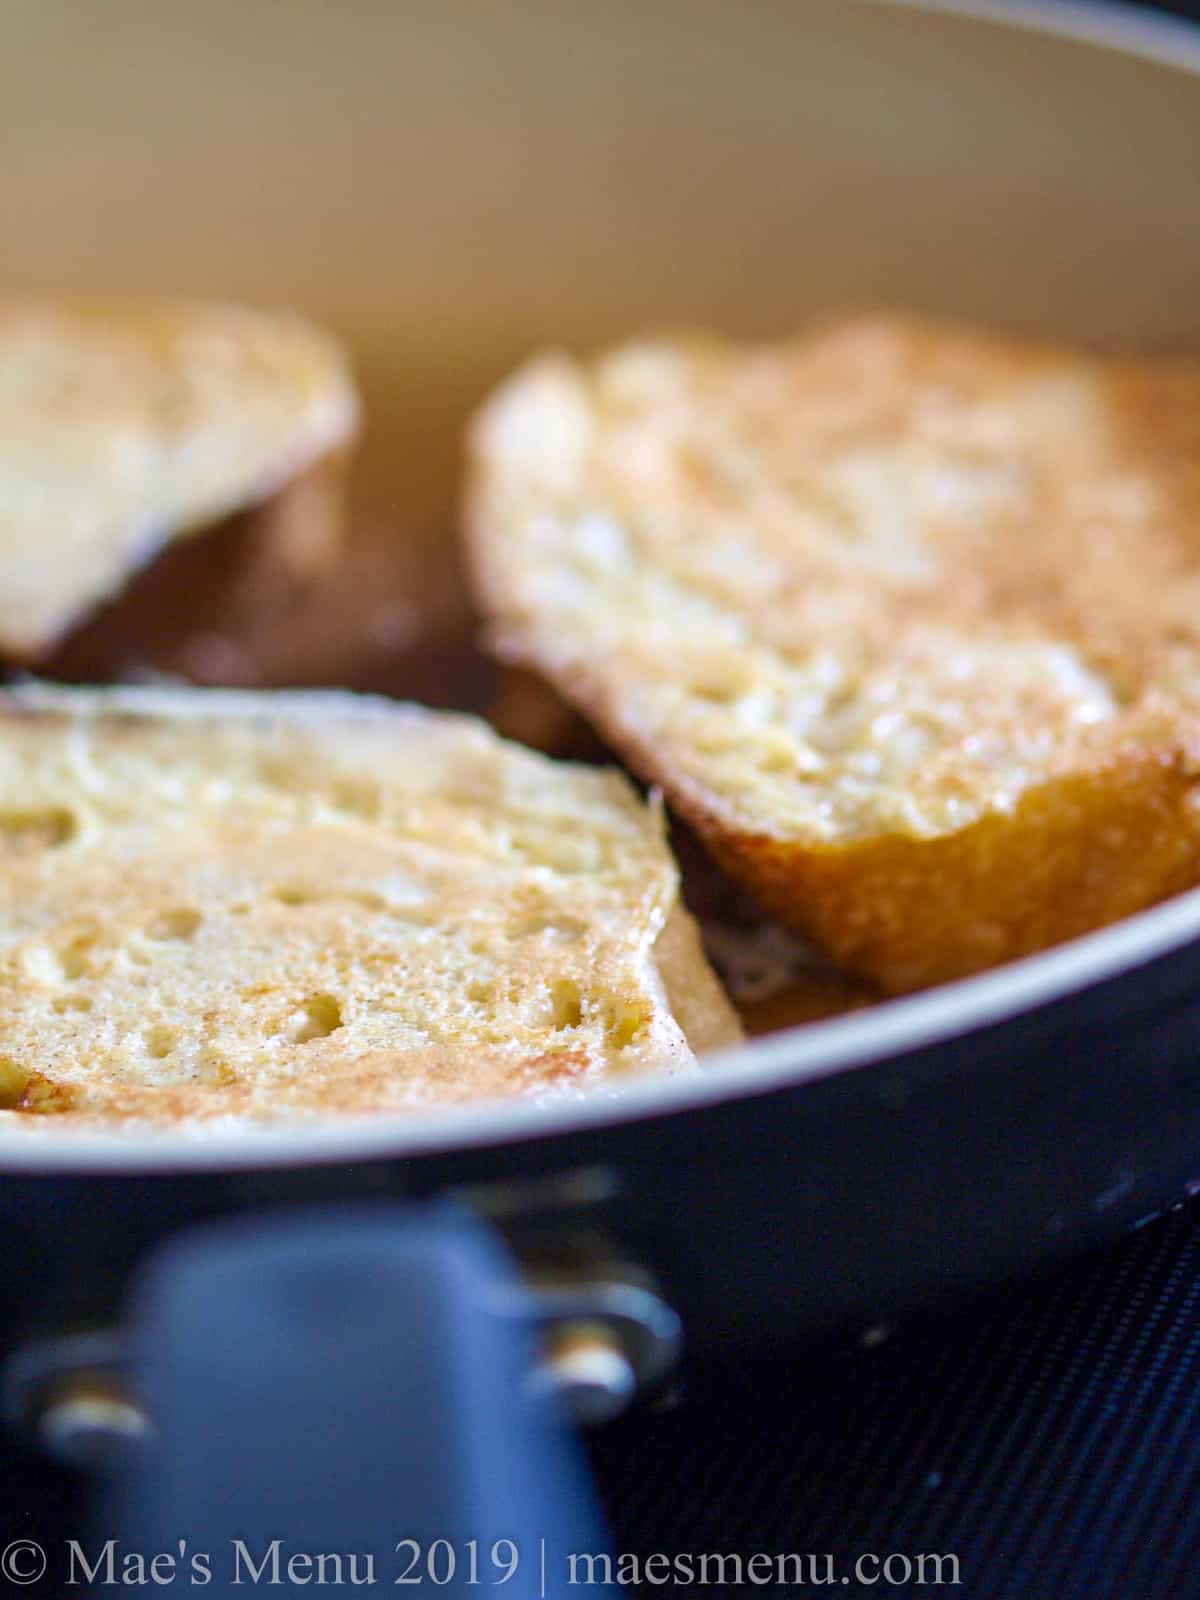 Large slices of healthy french toast cooking in a pan